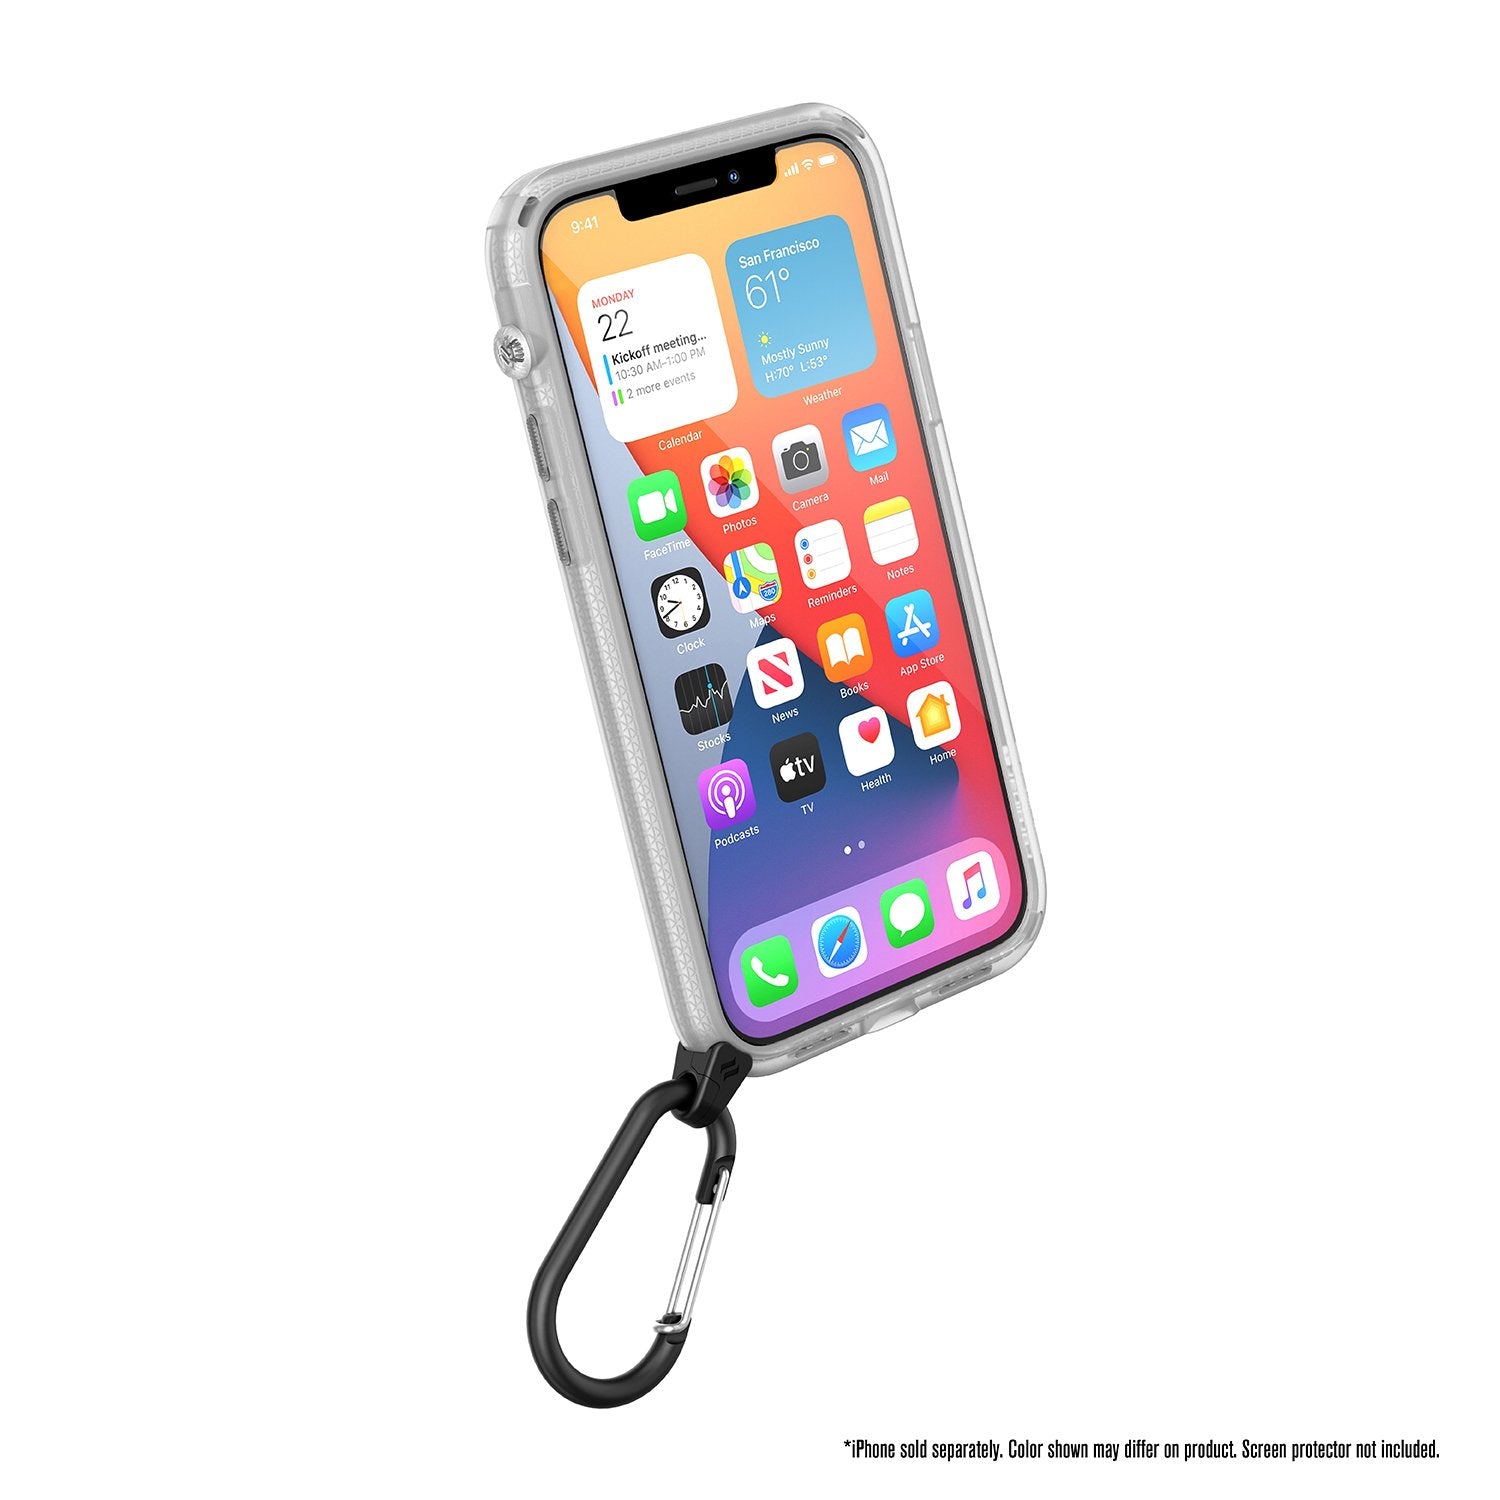 Buy Total Protection Case for iPhone 12 Series by Catalyst®